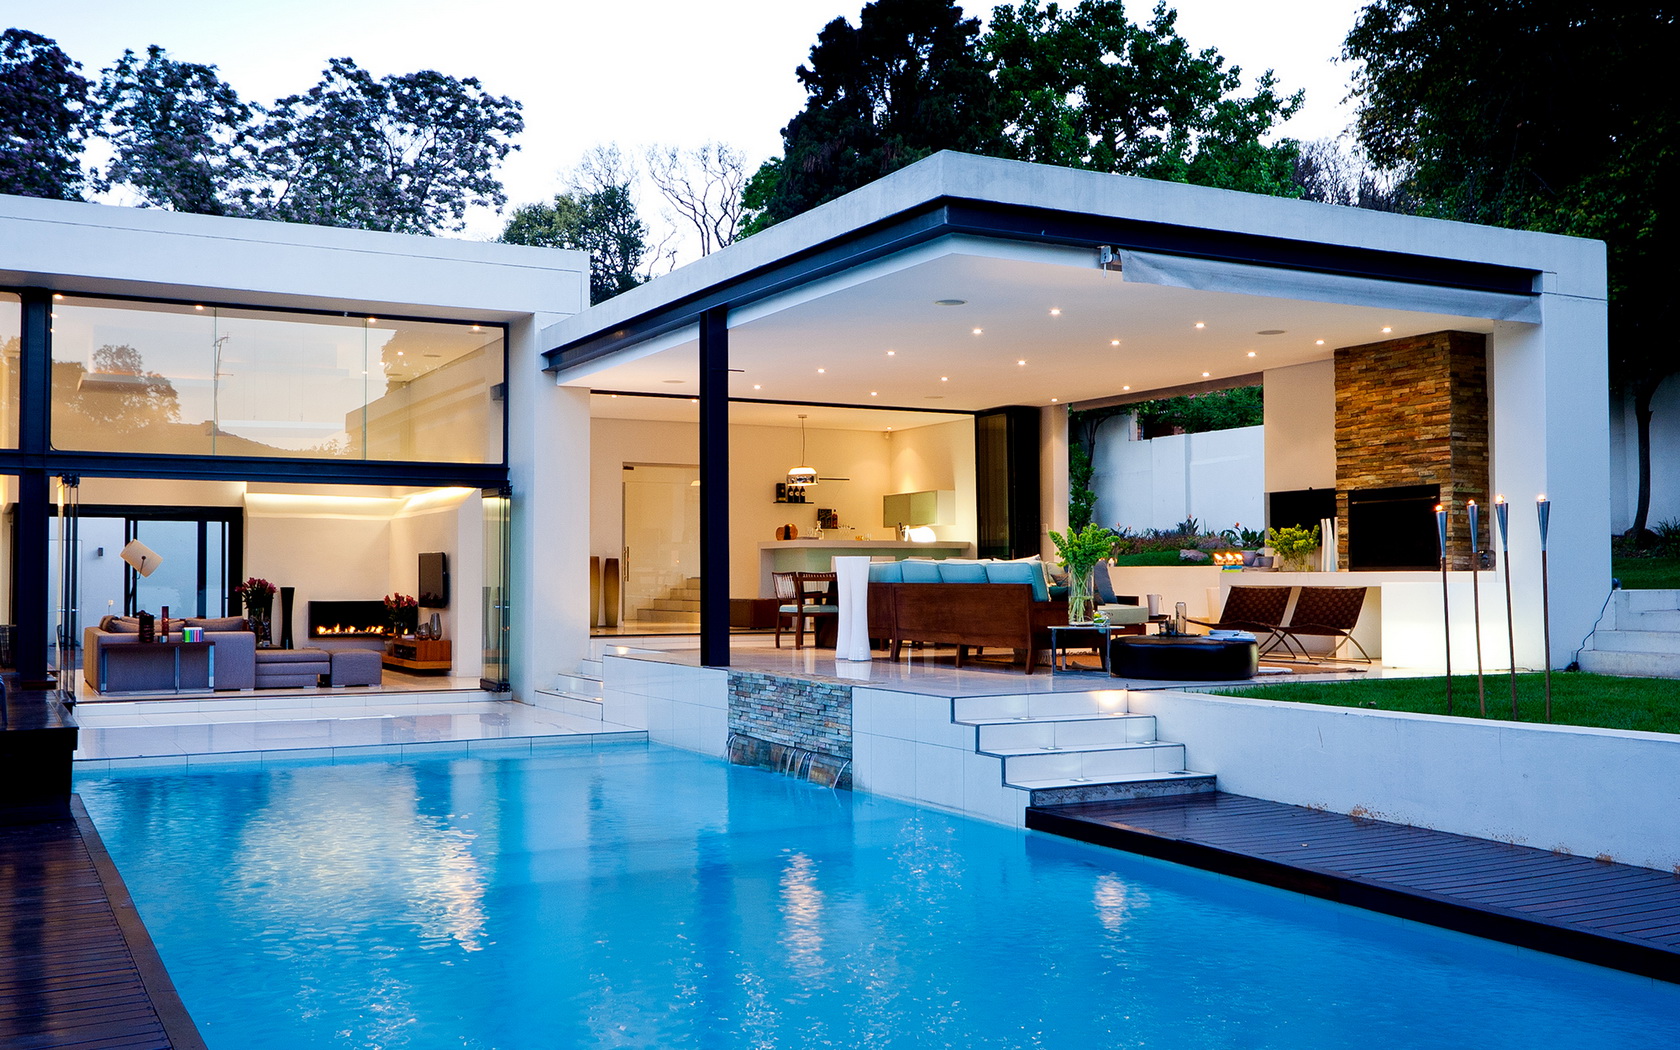 Architecture Swiming Pool House Modern wallpaper background